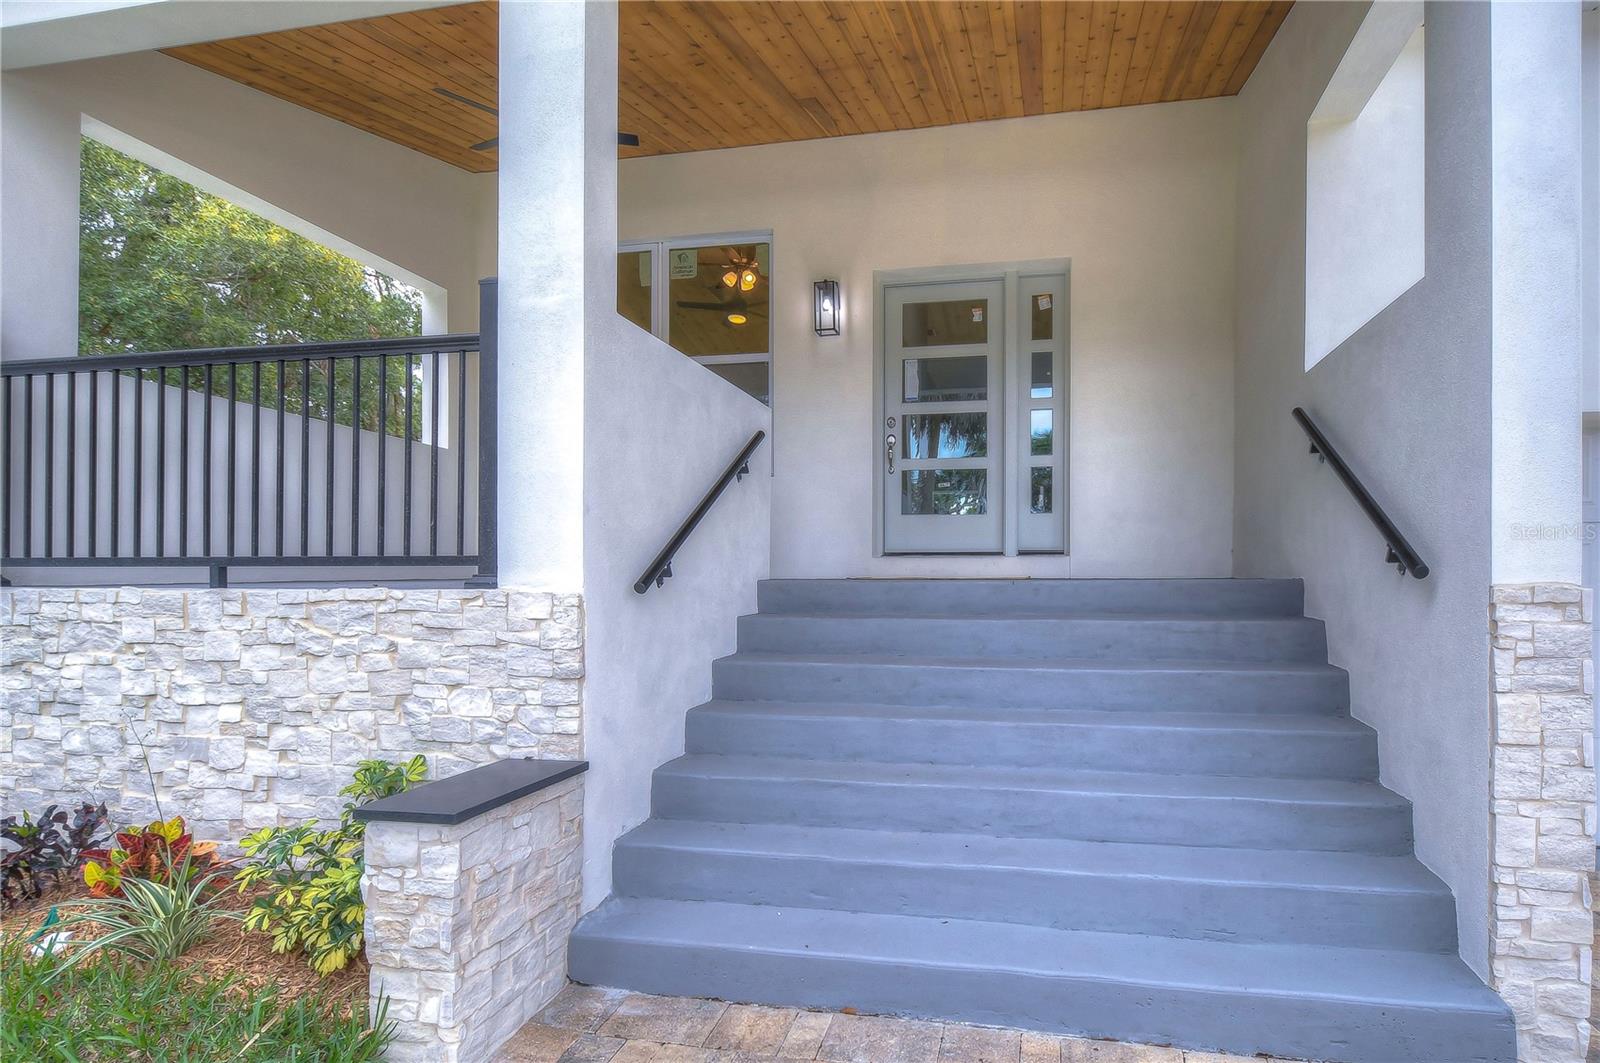 Wood, and Natural Stone Details add so much interest to this HOME! The contemporary style front door WELCOMES YOU IN.